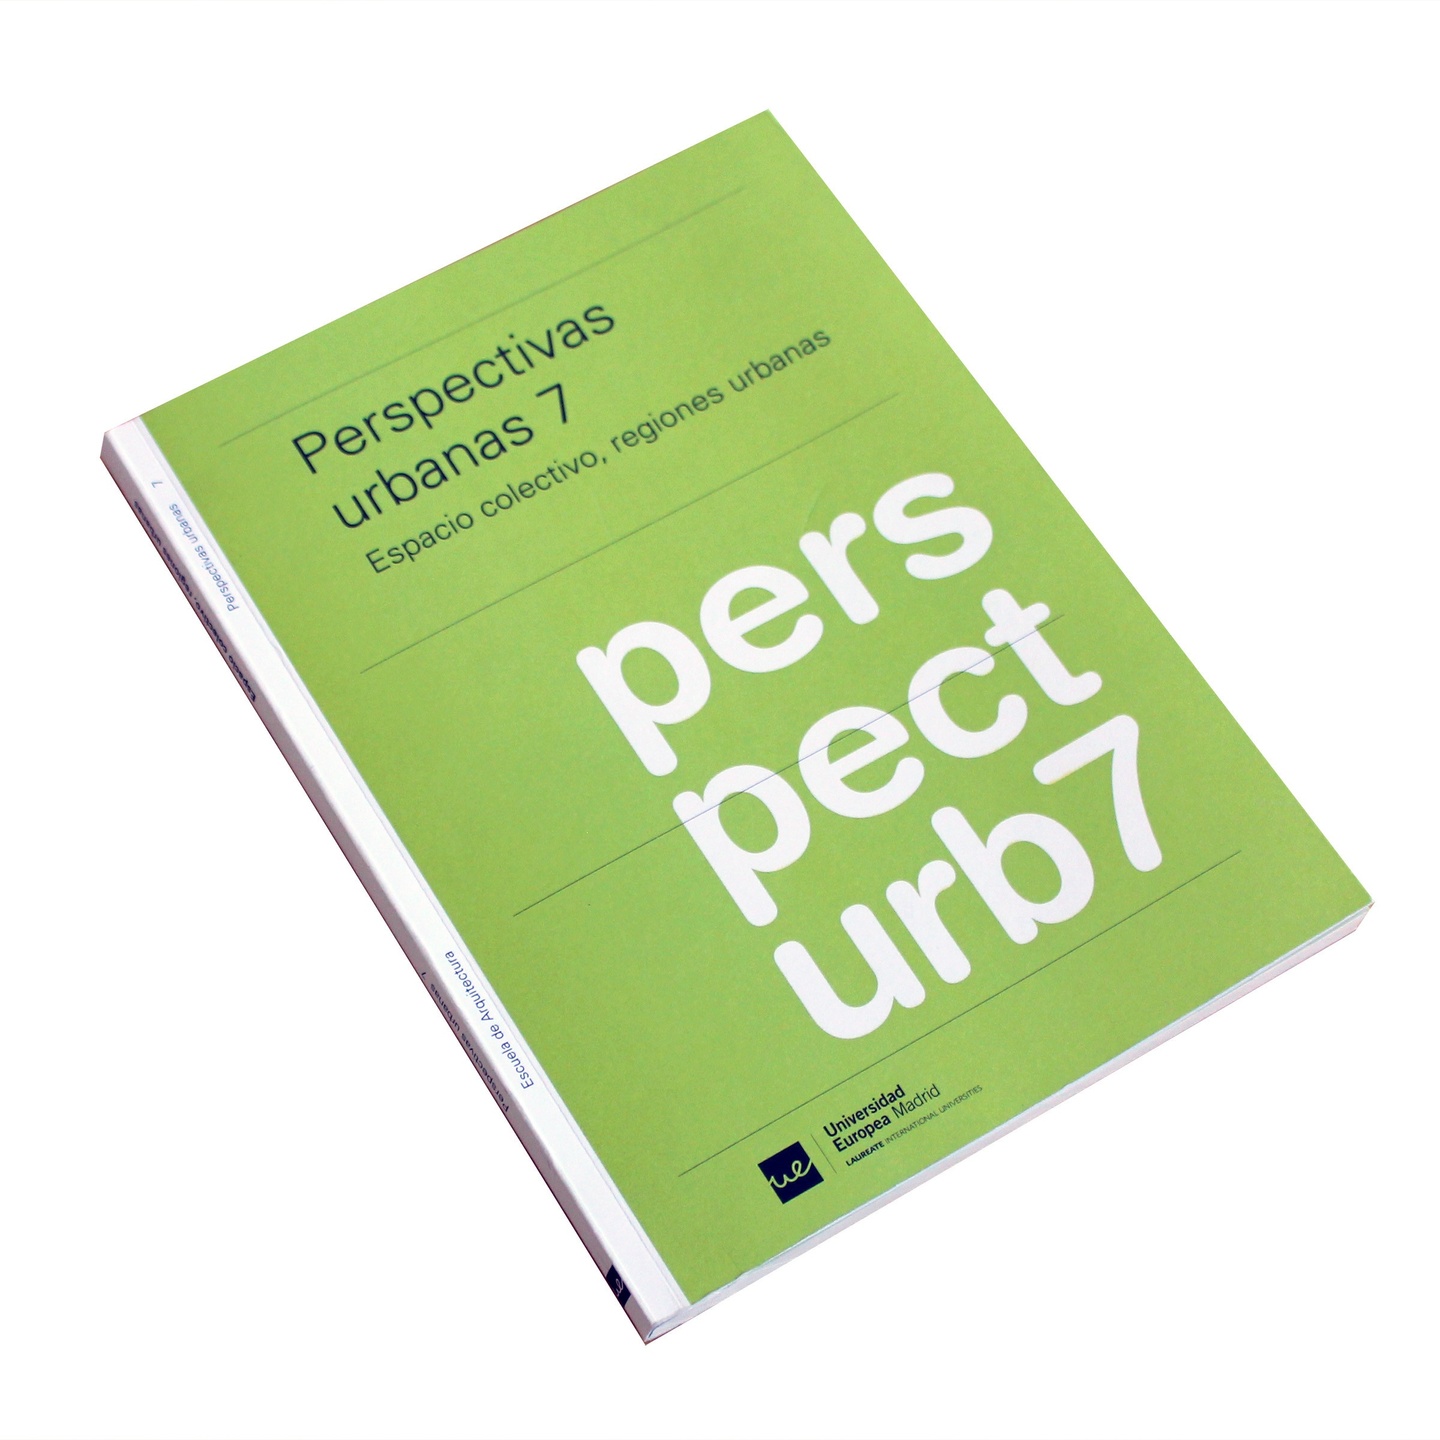 Lime green cover of Perspectivas Urbanas 7